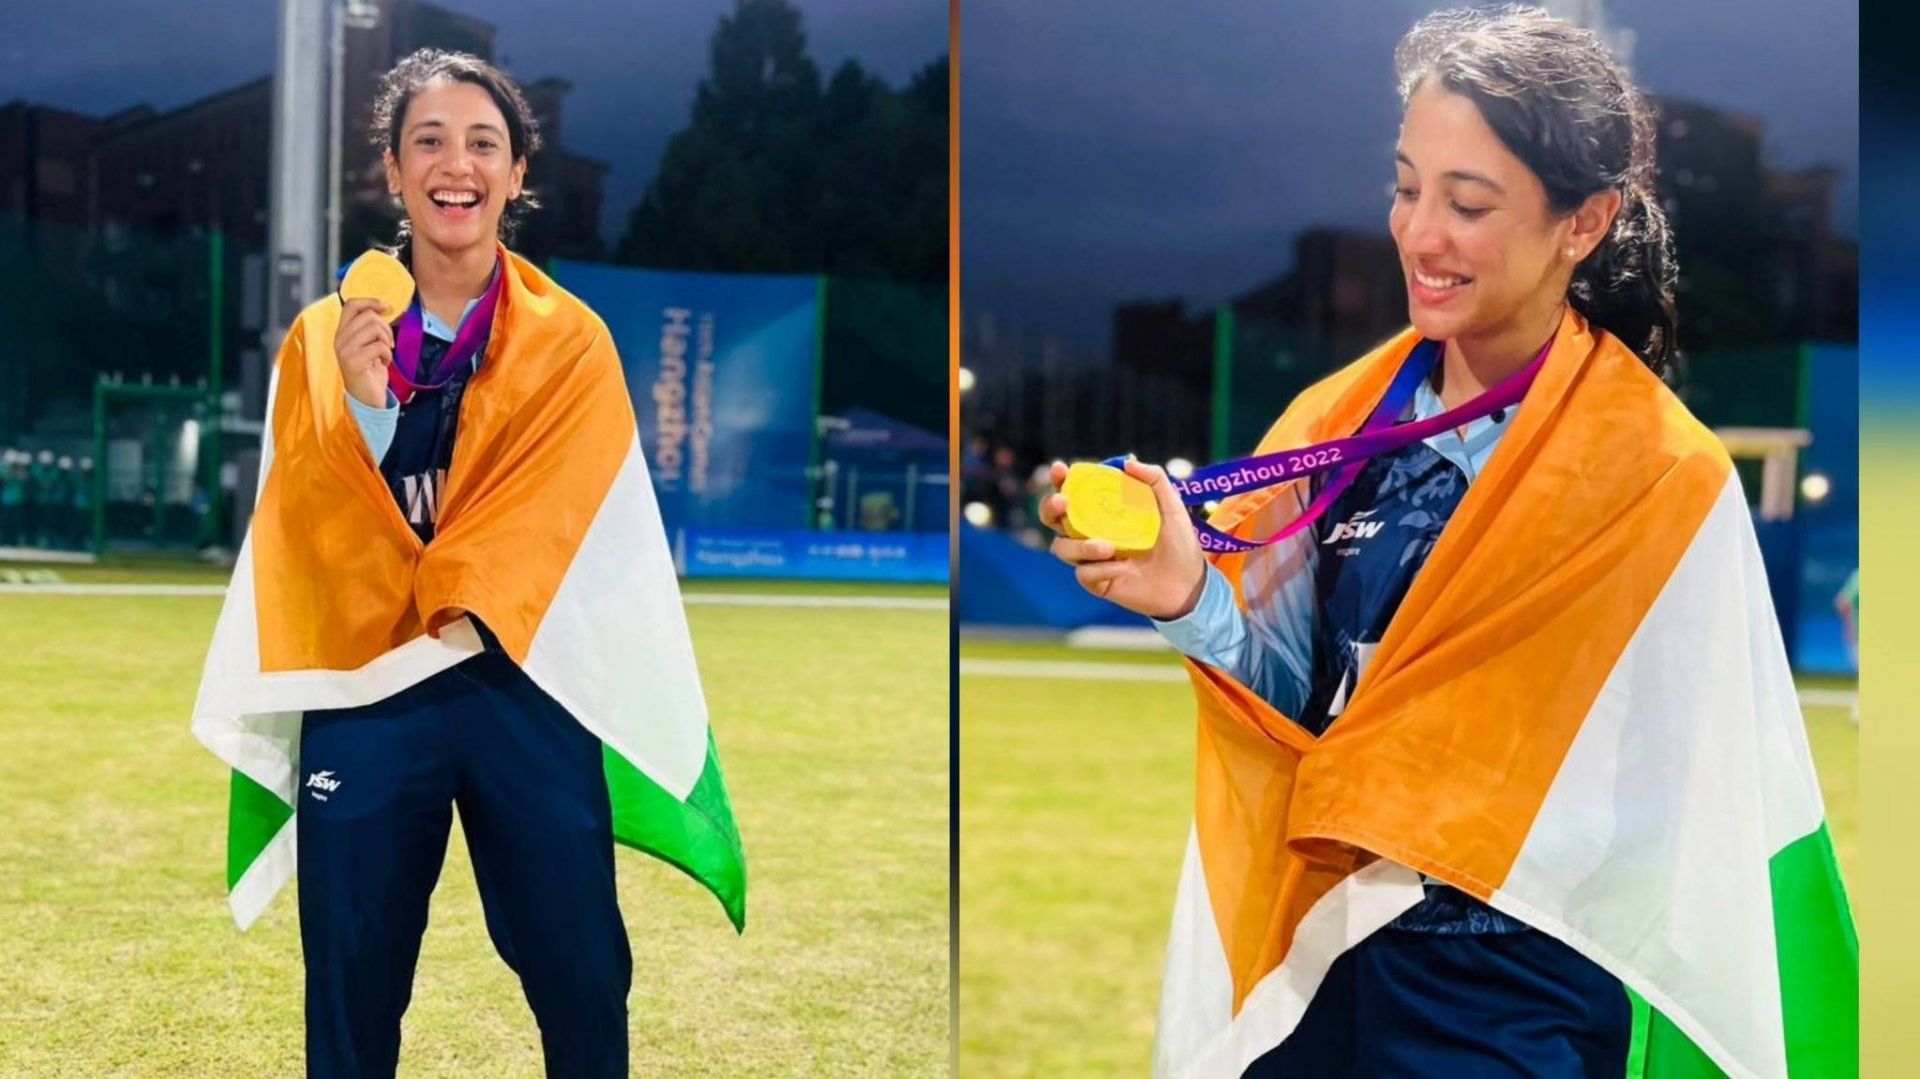 Smriti Mandhana captained India in the first two games (Image: Instagram)